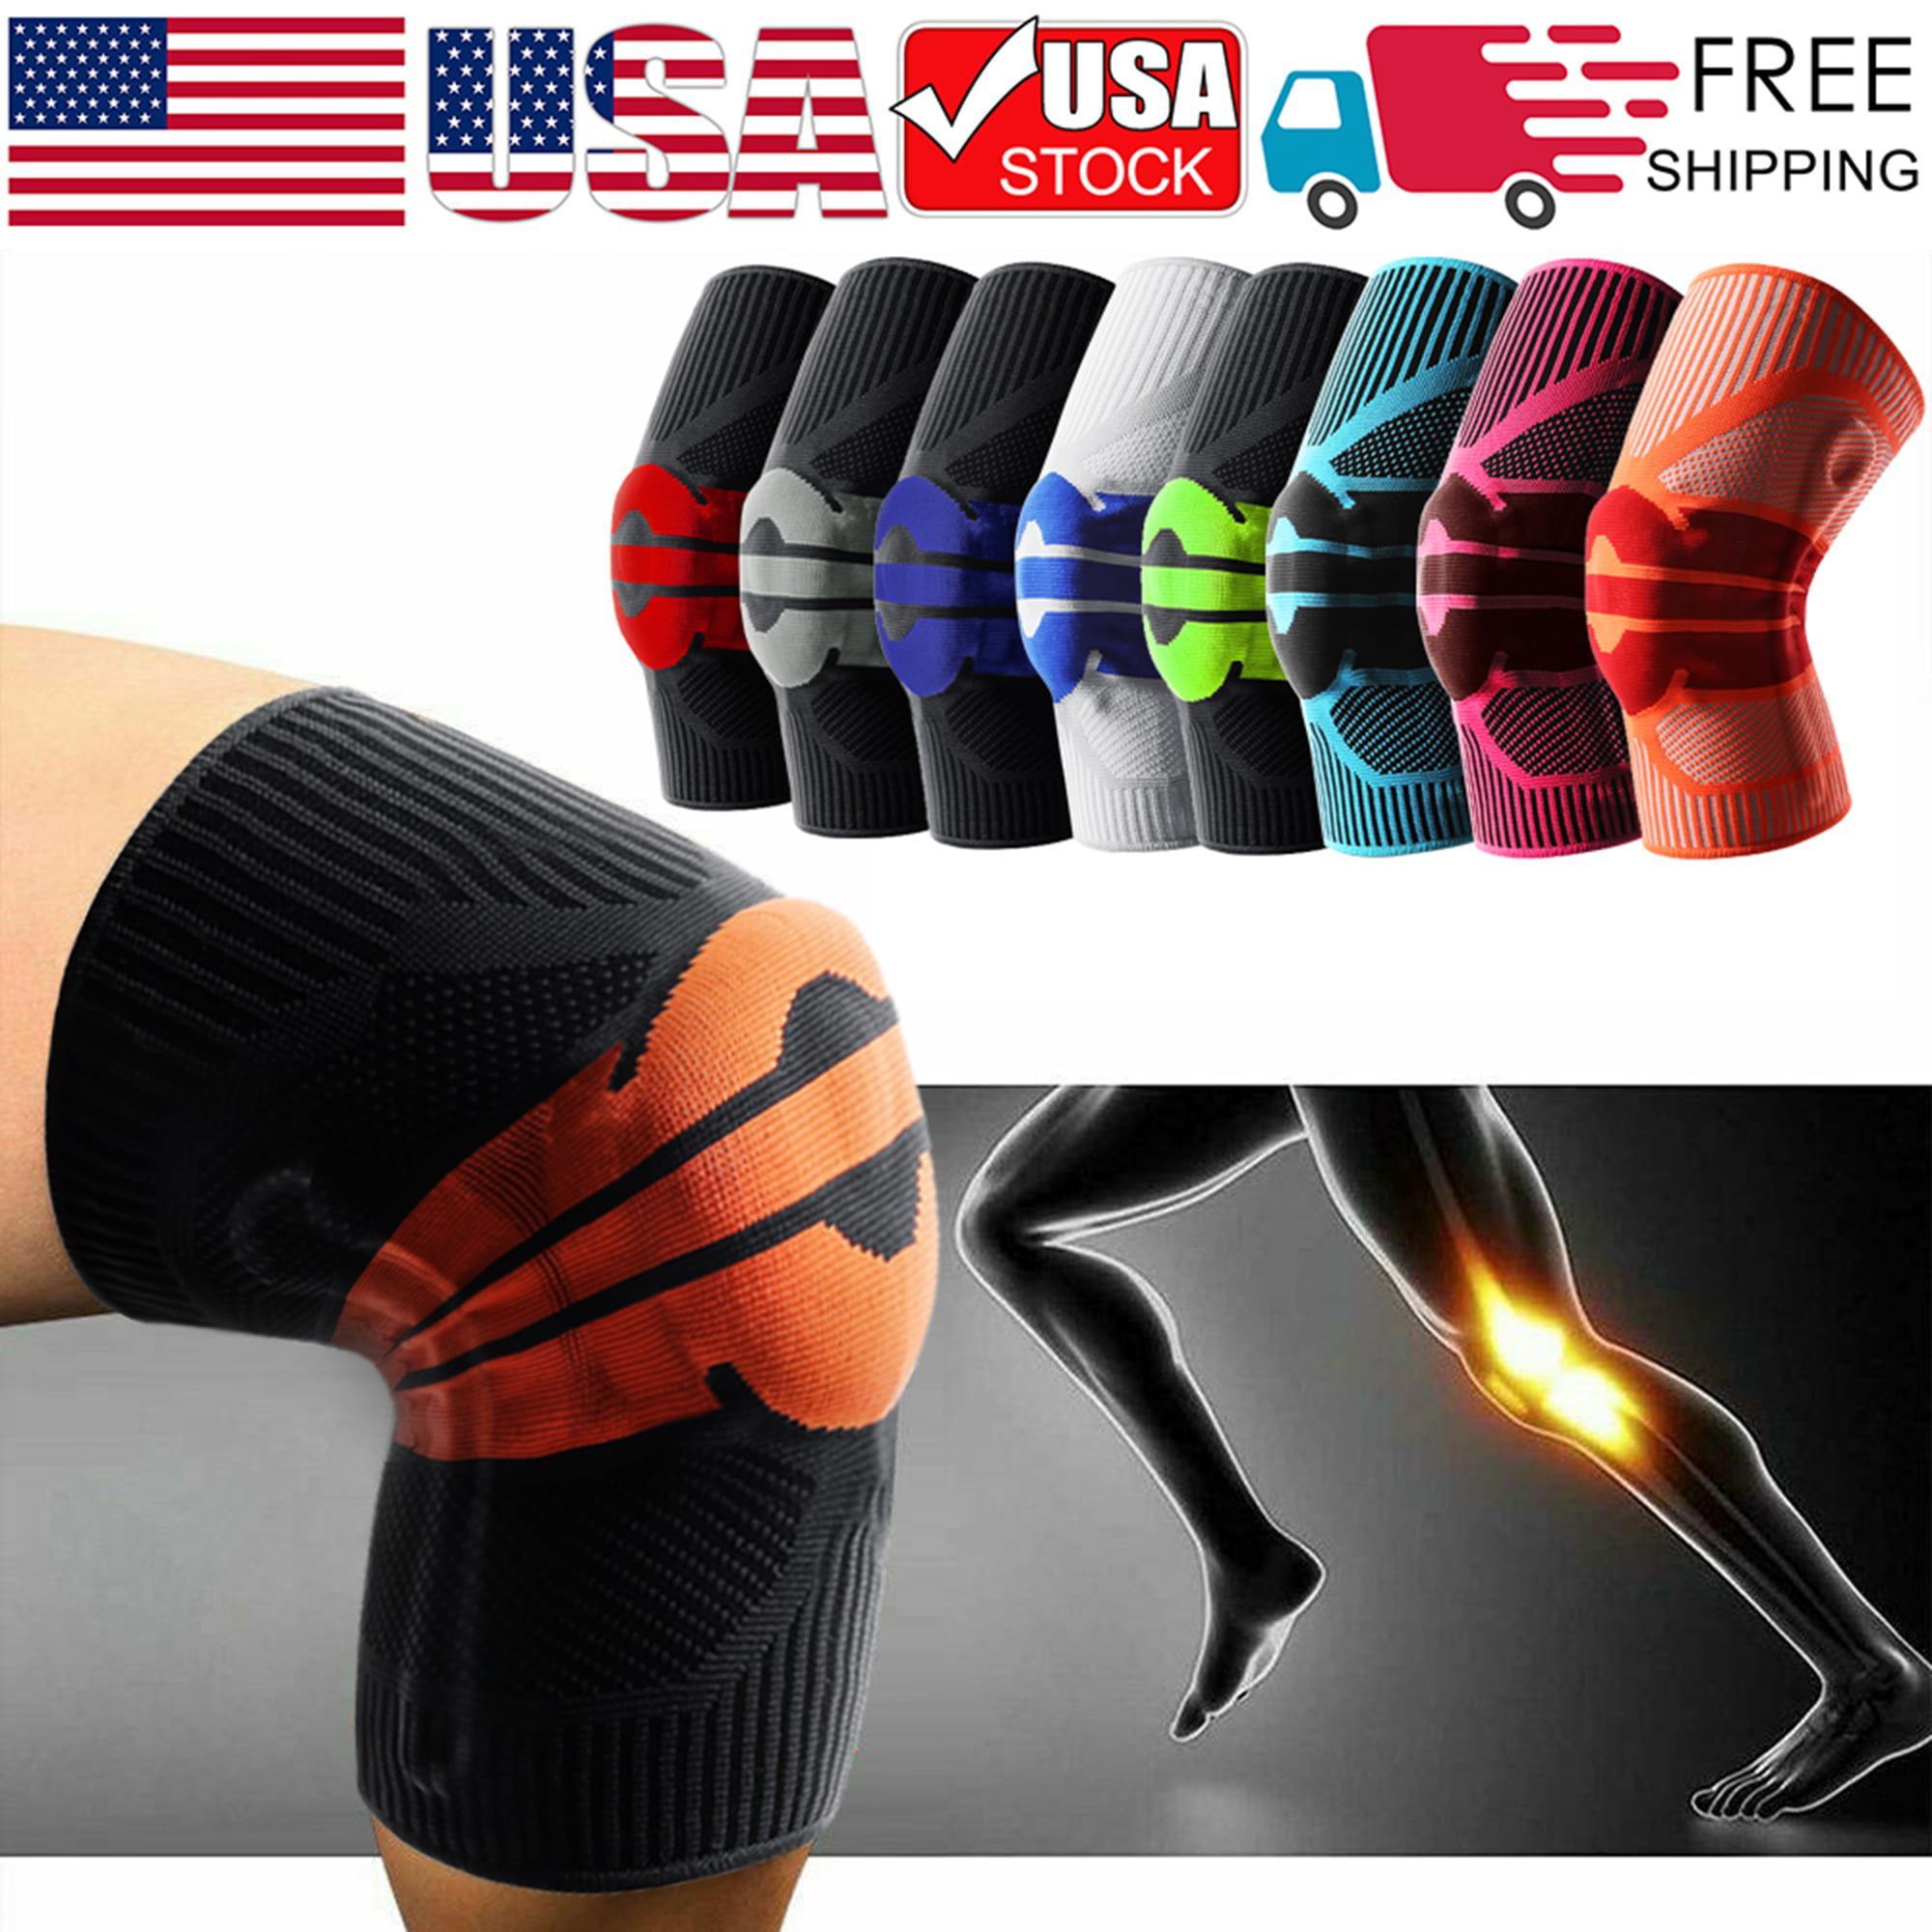 Compression Knee Pads Support Brace Sleeve Running Weightlifting Stabilizer USA